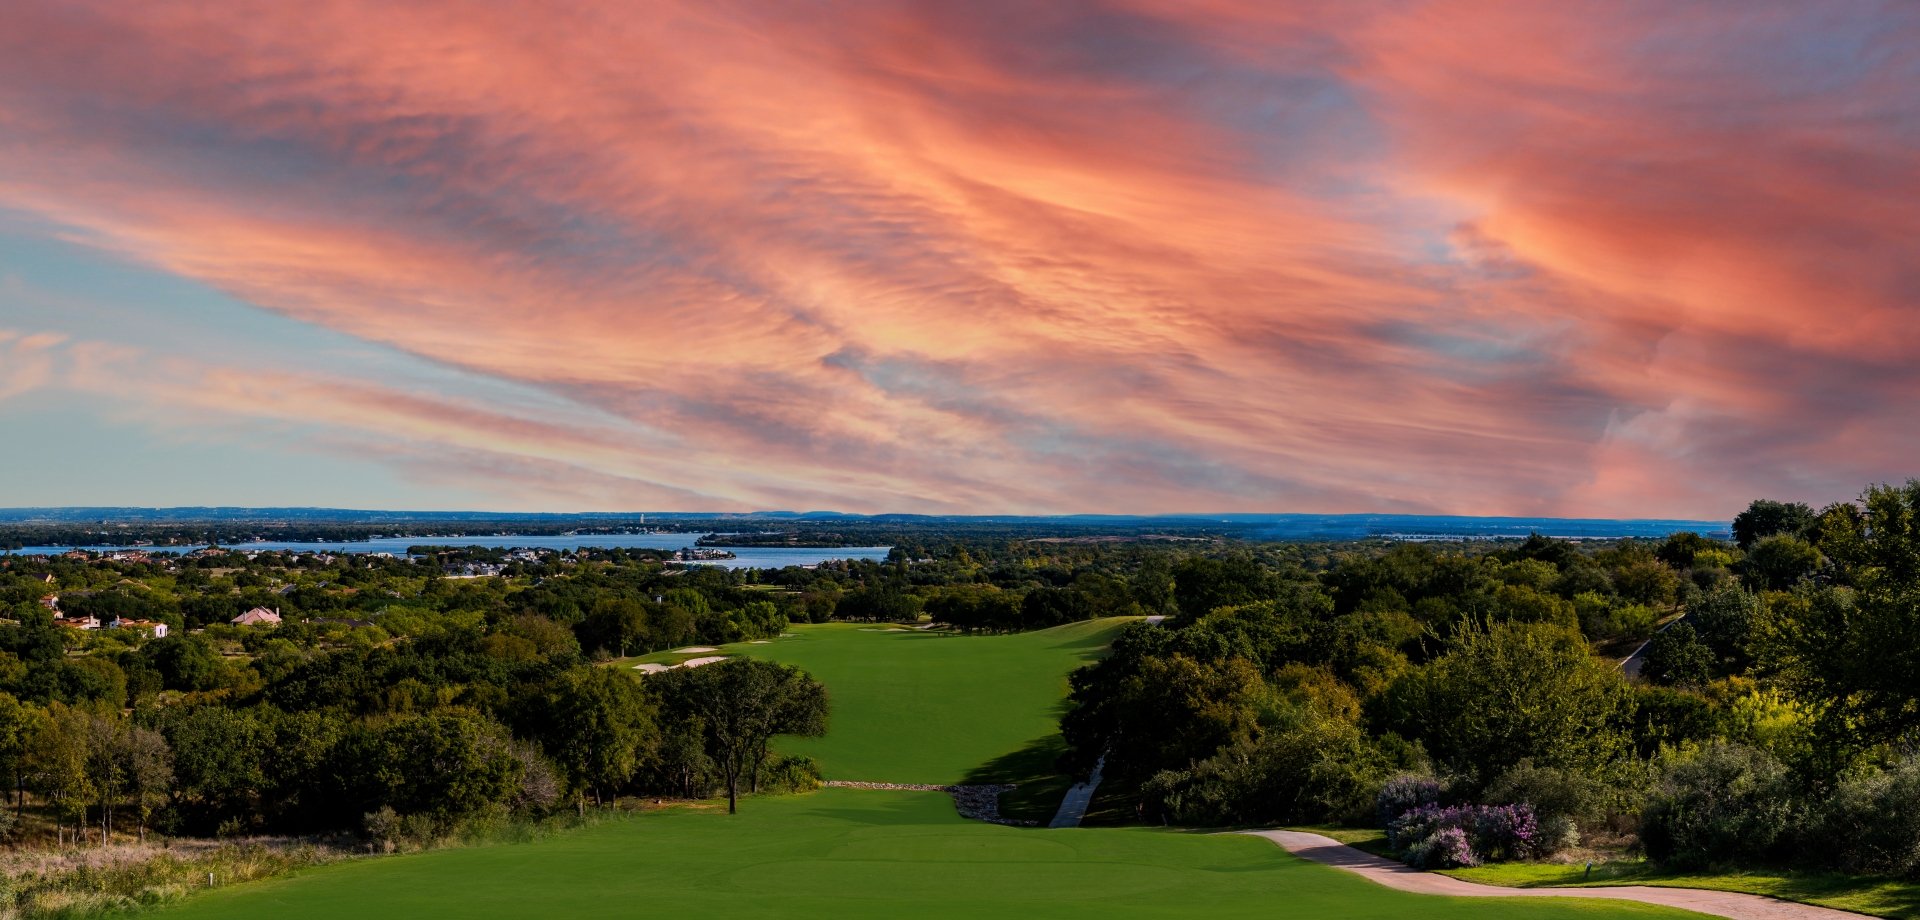 Red and orange sunset on a golf course overlooking the Texas Hill Country landscape.